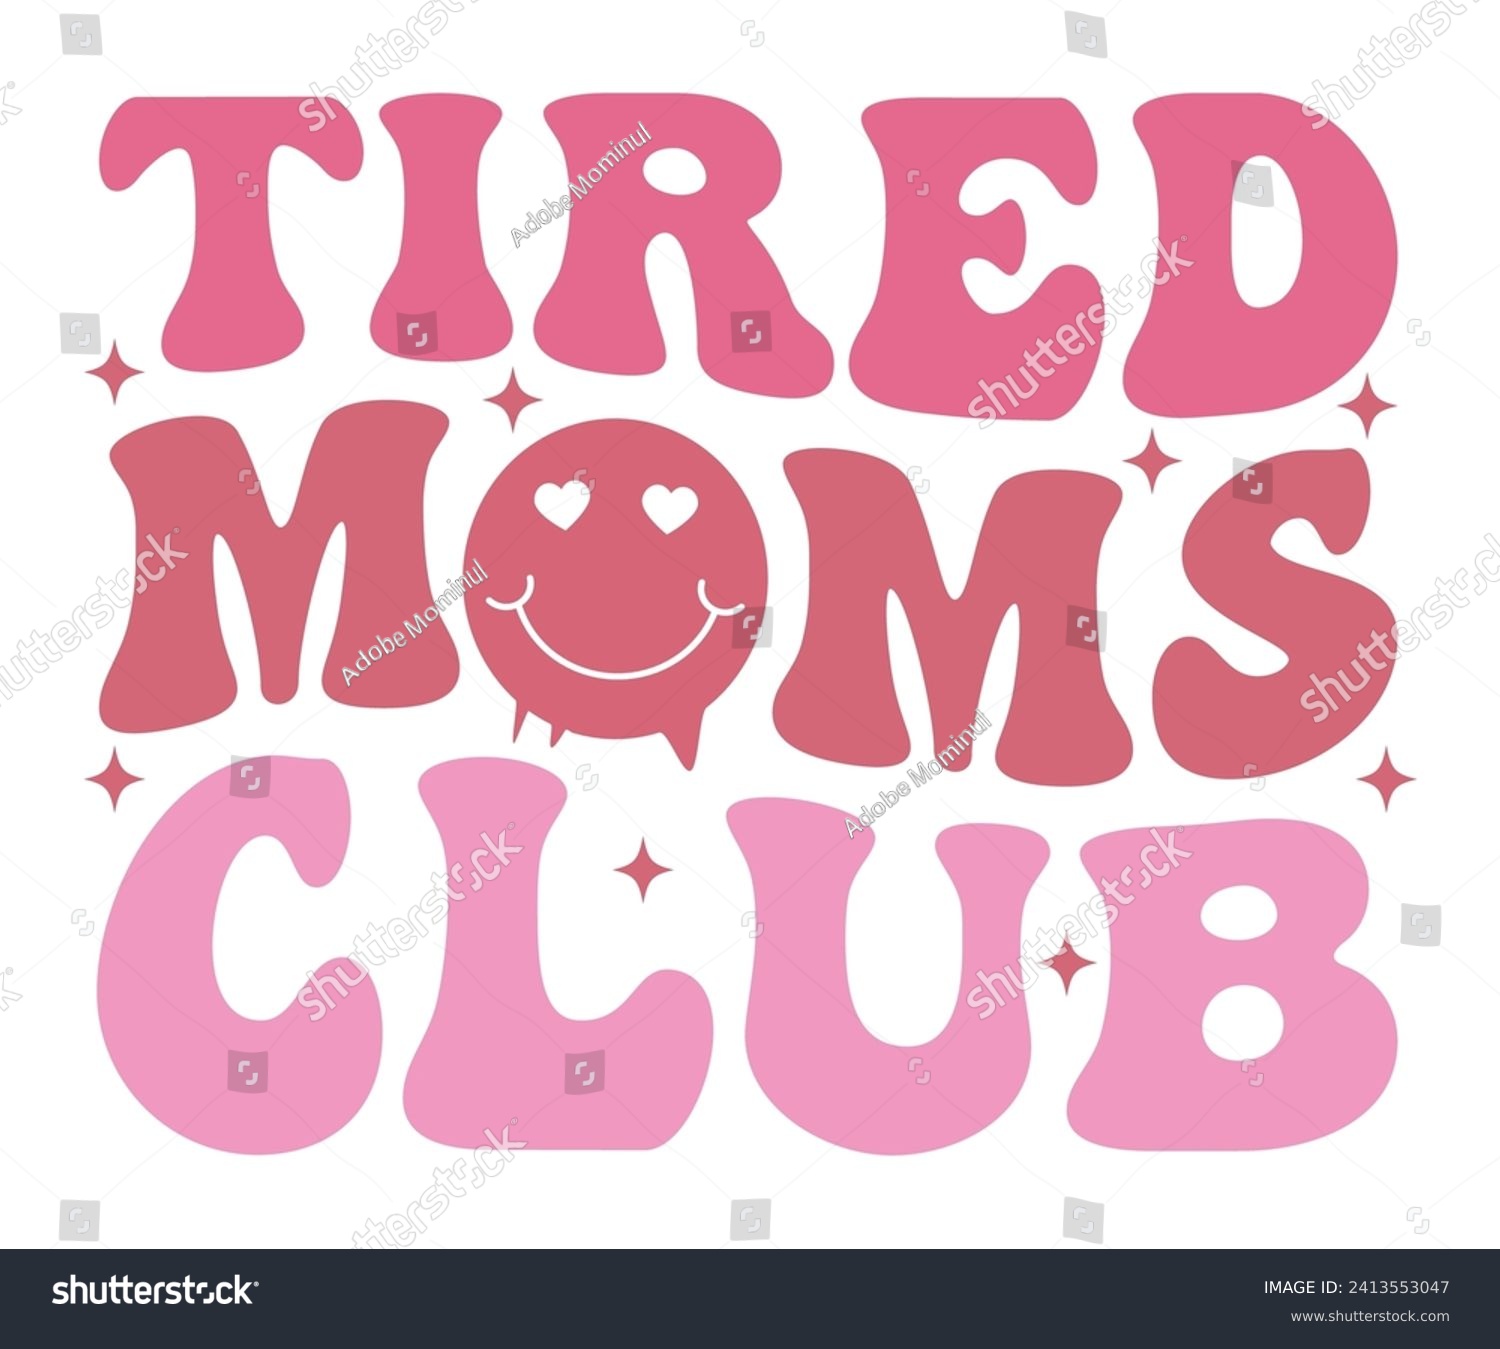 SVG of Tired Moms Club Svg,Mothers Day Svg,Png,Mom Quotes Svg,Funny Mom Svg,Gift For Mom Svg,Mom life Svg,Mama Svg,Mommy T-shirt Design,Svg Cut File,Dog Mom deisn,Retro Groovy,Auntie T-shirt Design,Wavy, svg